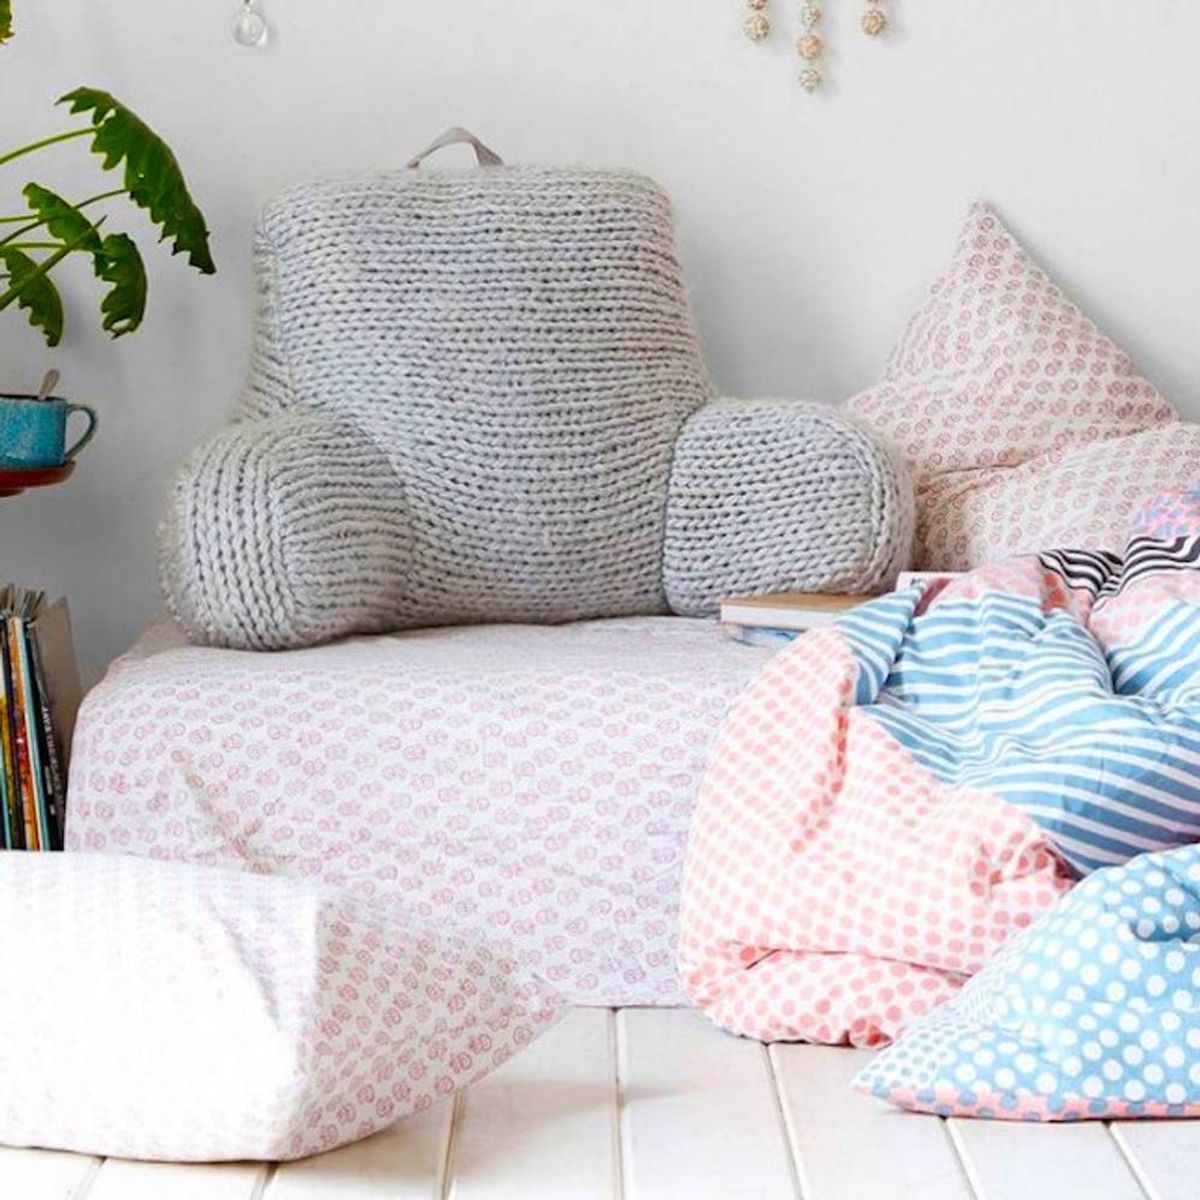 20 Ways to Turn Any Room into a Guest Bedroom for Holiday Guests